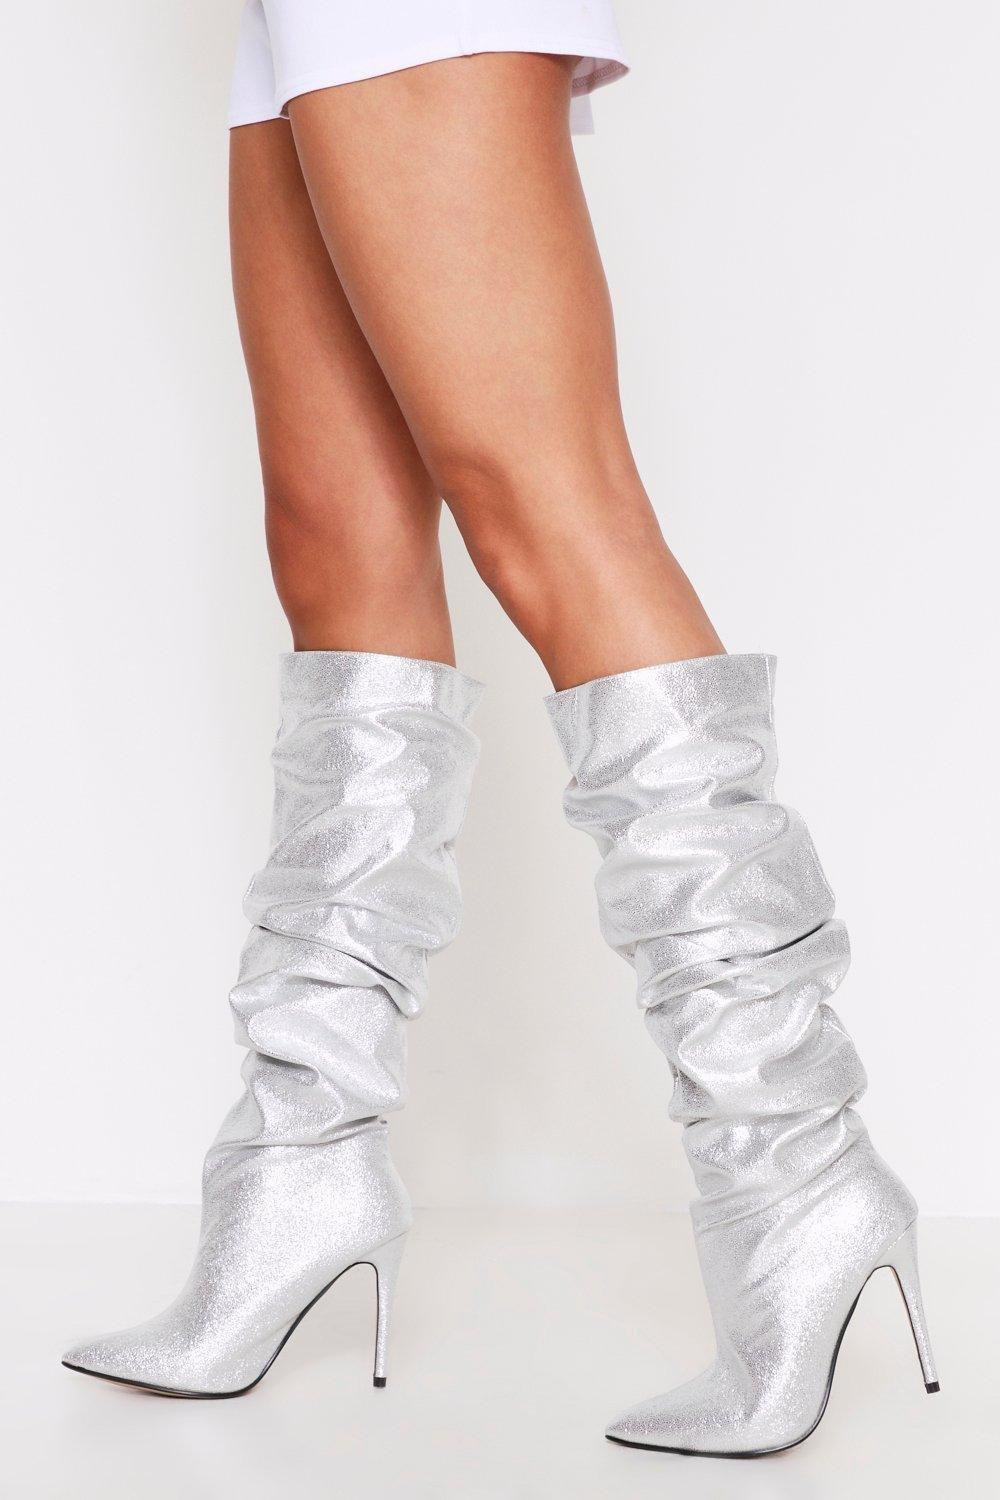 silver knee high boots uk